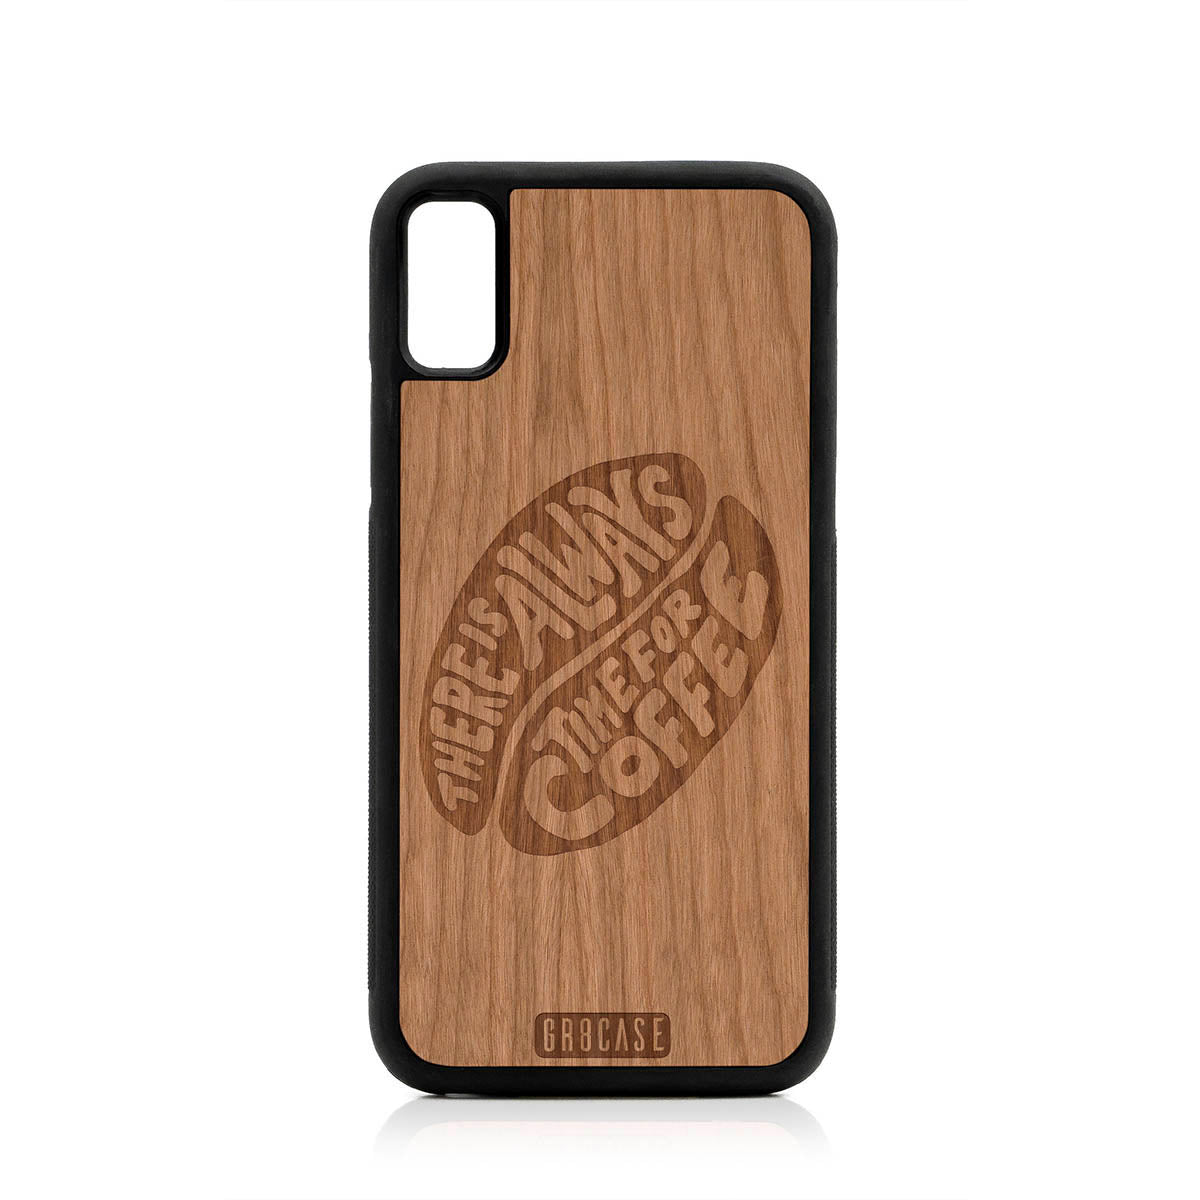 There Is Always Time For Coffee Design Wood Case For iPhone XS Max